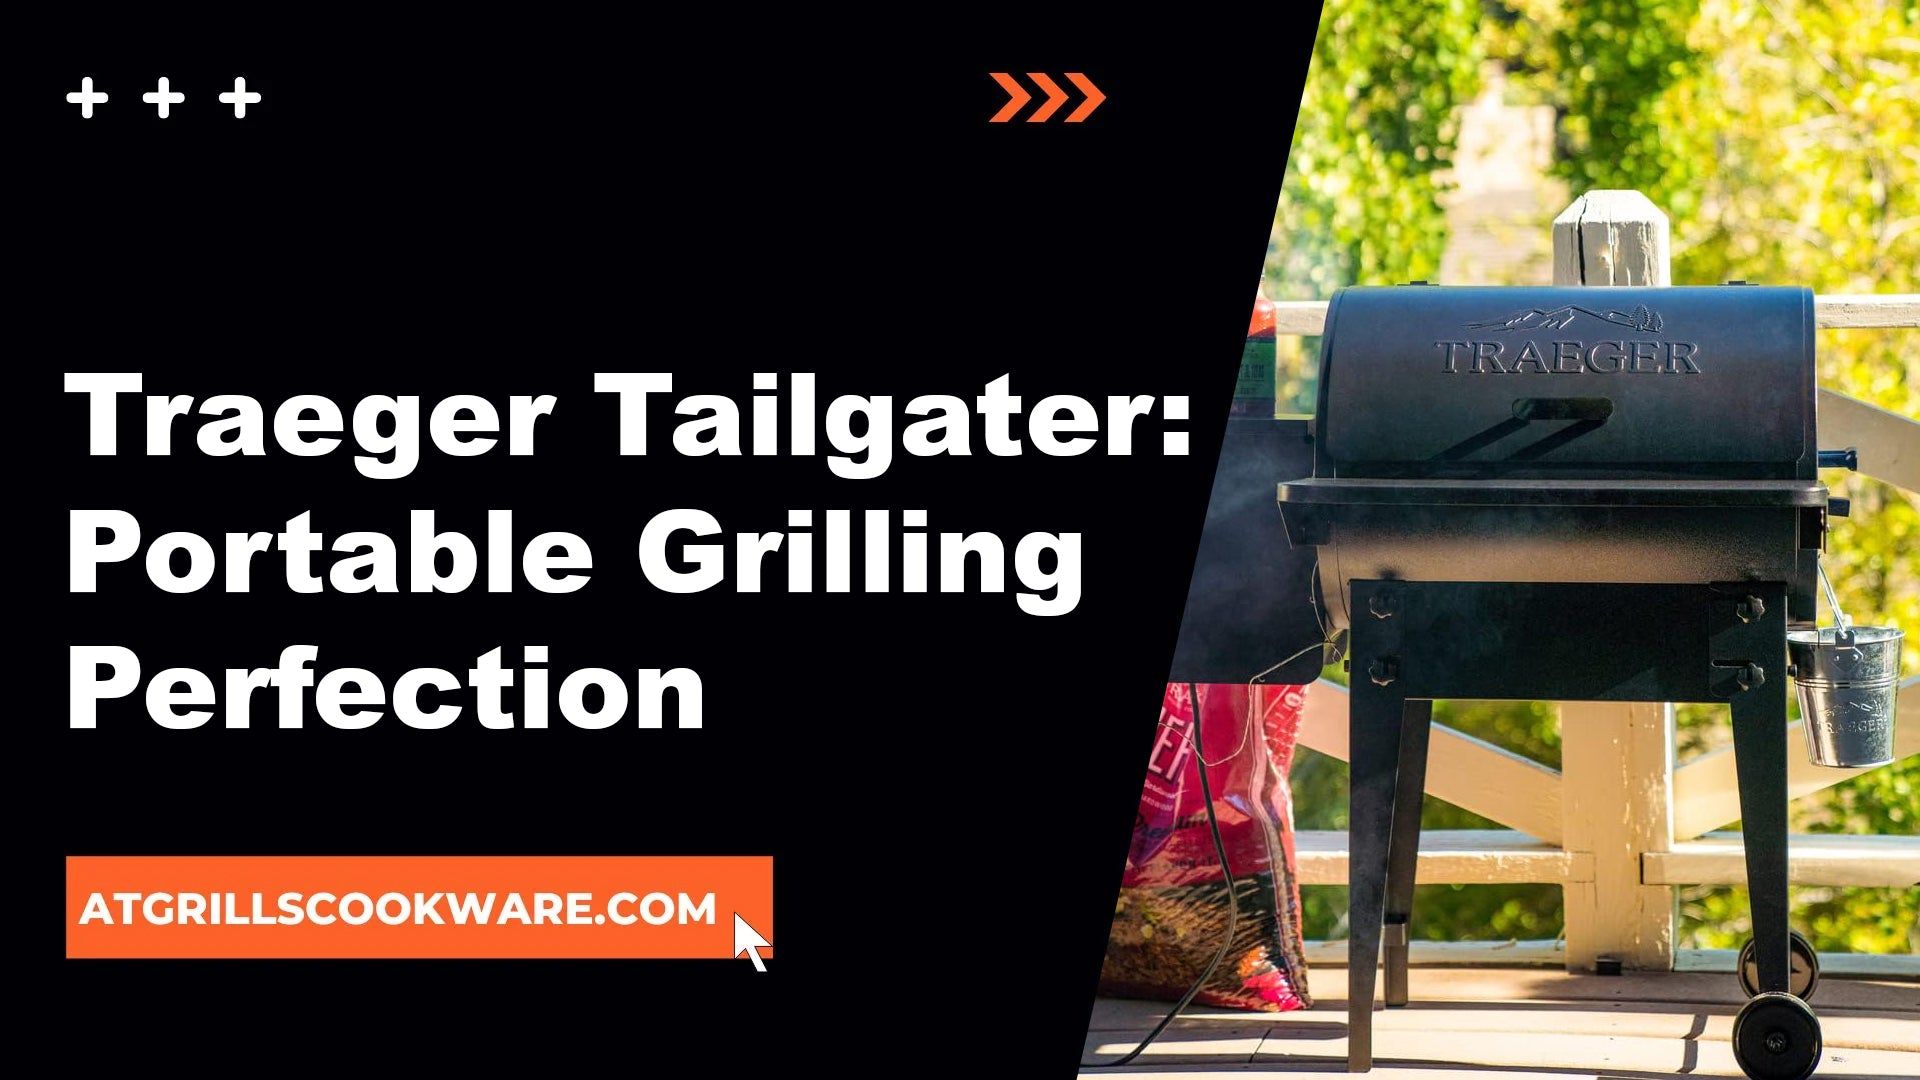 Discover the Versatility and Convenience of the Traeger Tailgater Grill